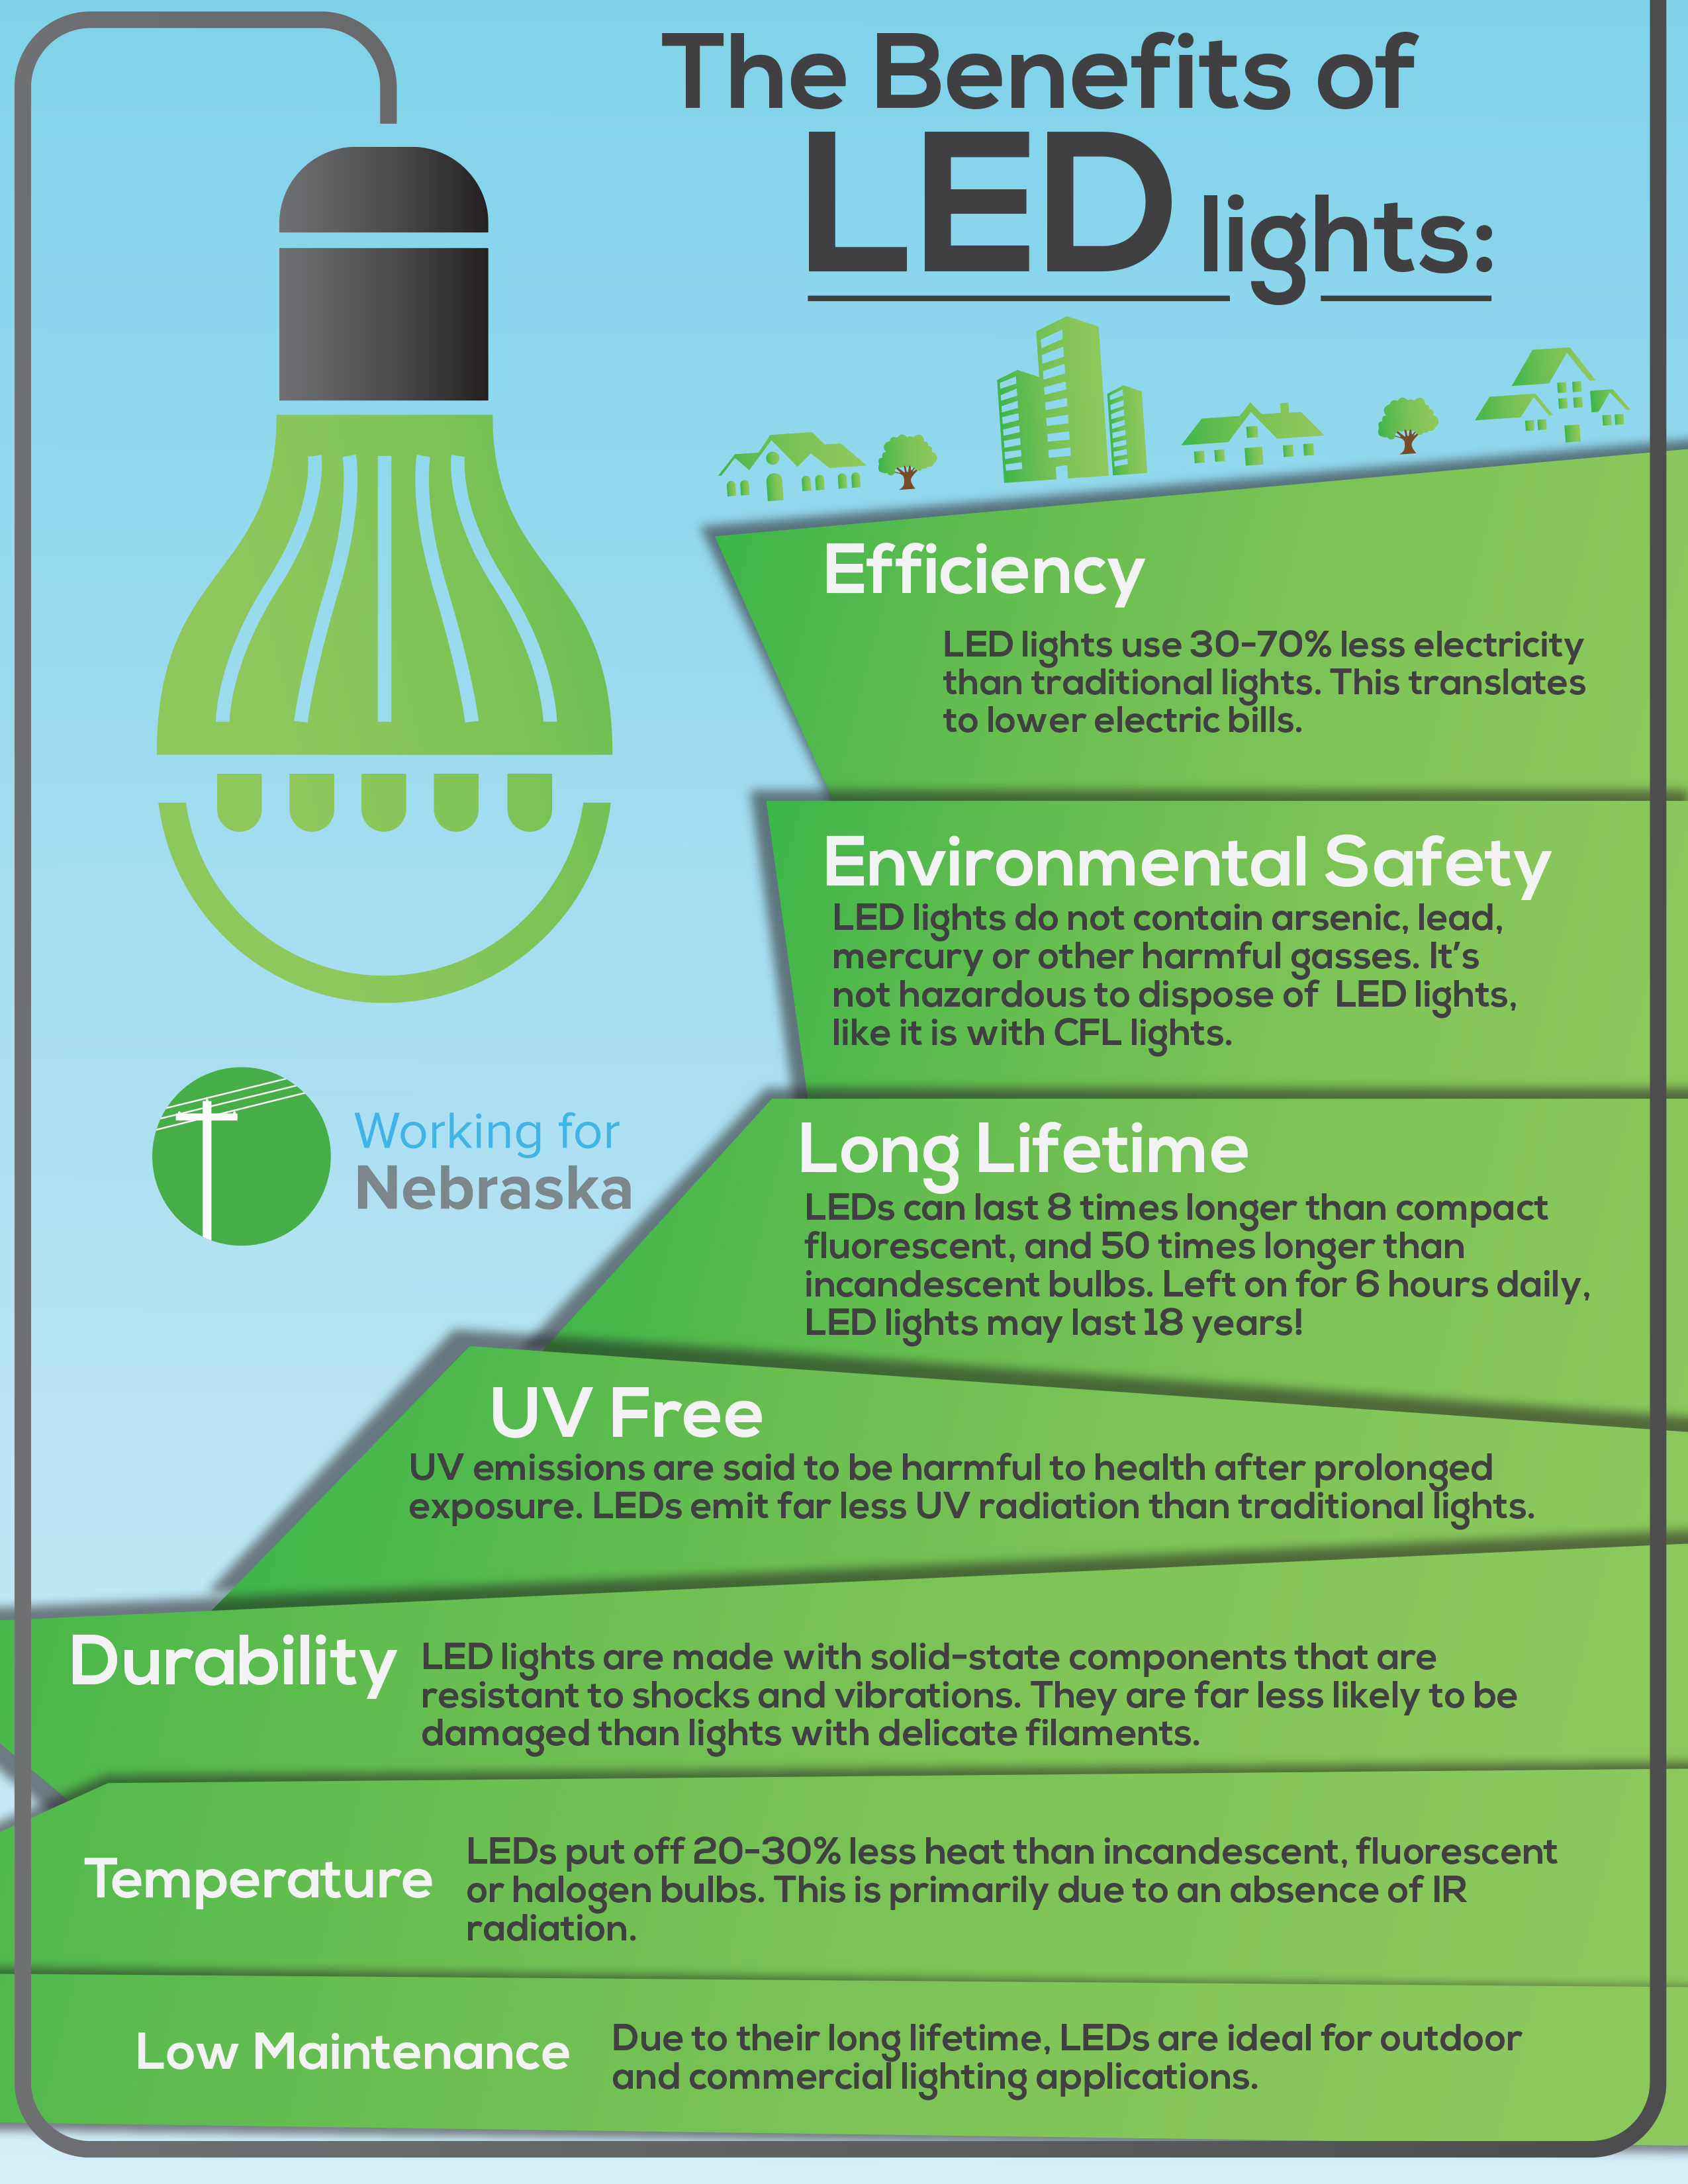 Benefits of LEDs infographic